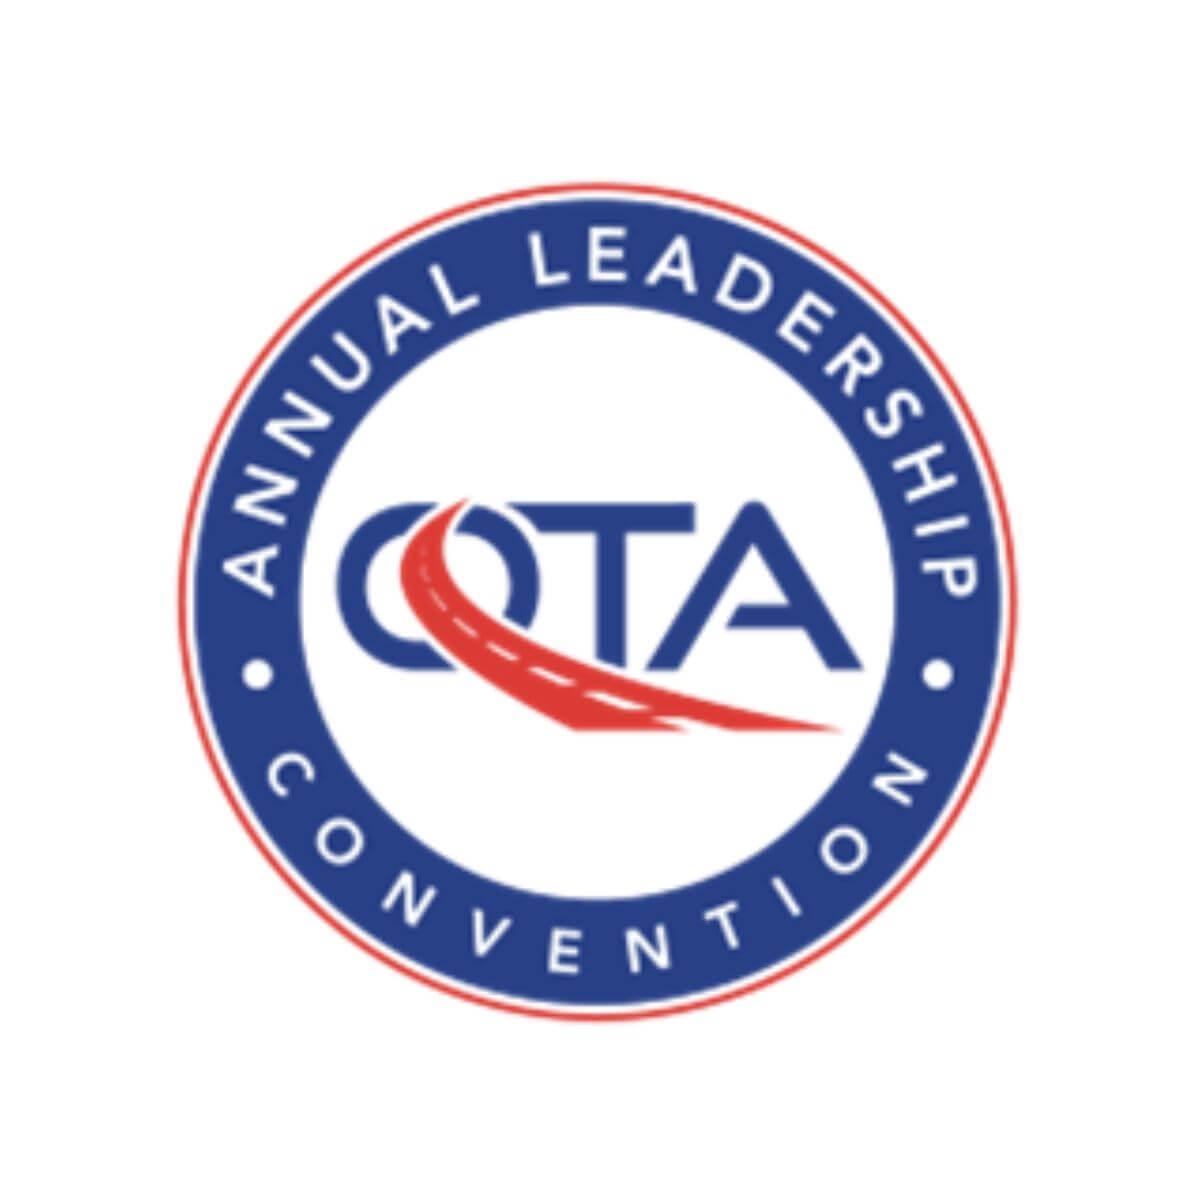 Leadership Convention & Exhibition: Aug. 19 - 21 in Bend